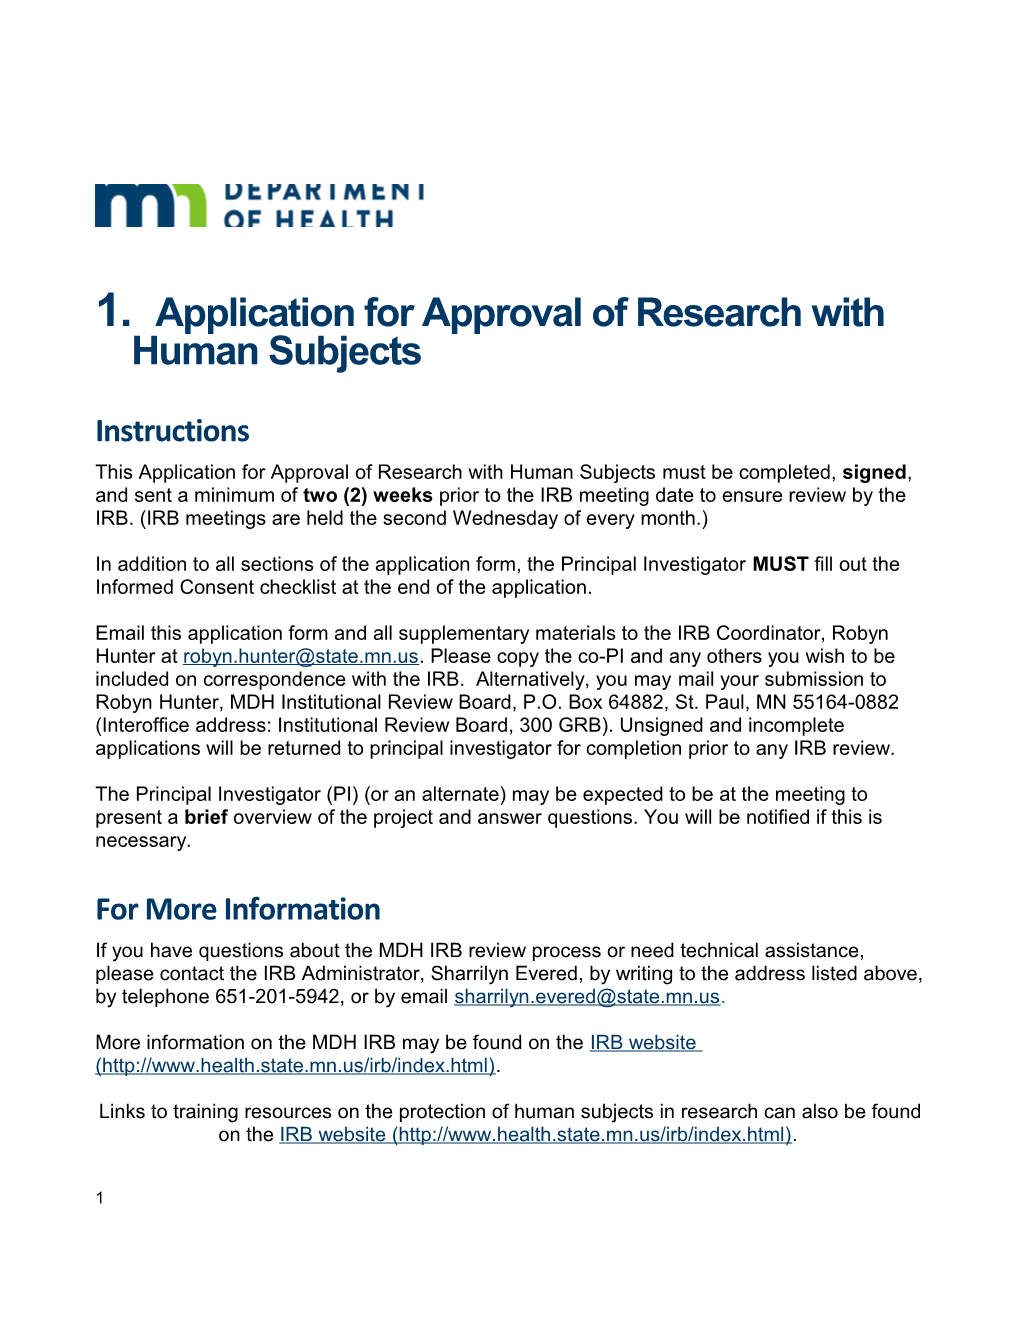 Application for Approval of Research with Human Subjects